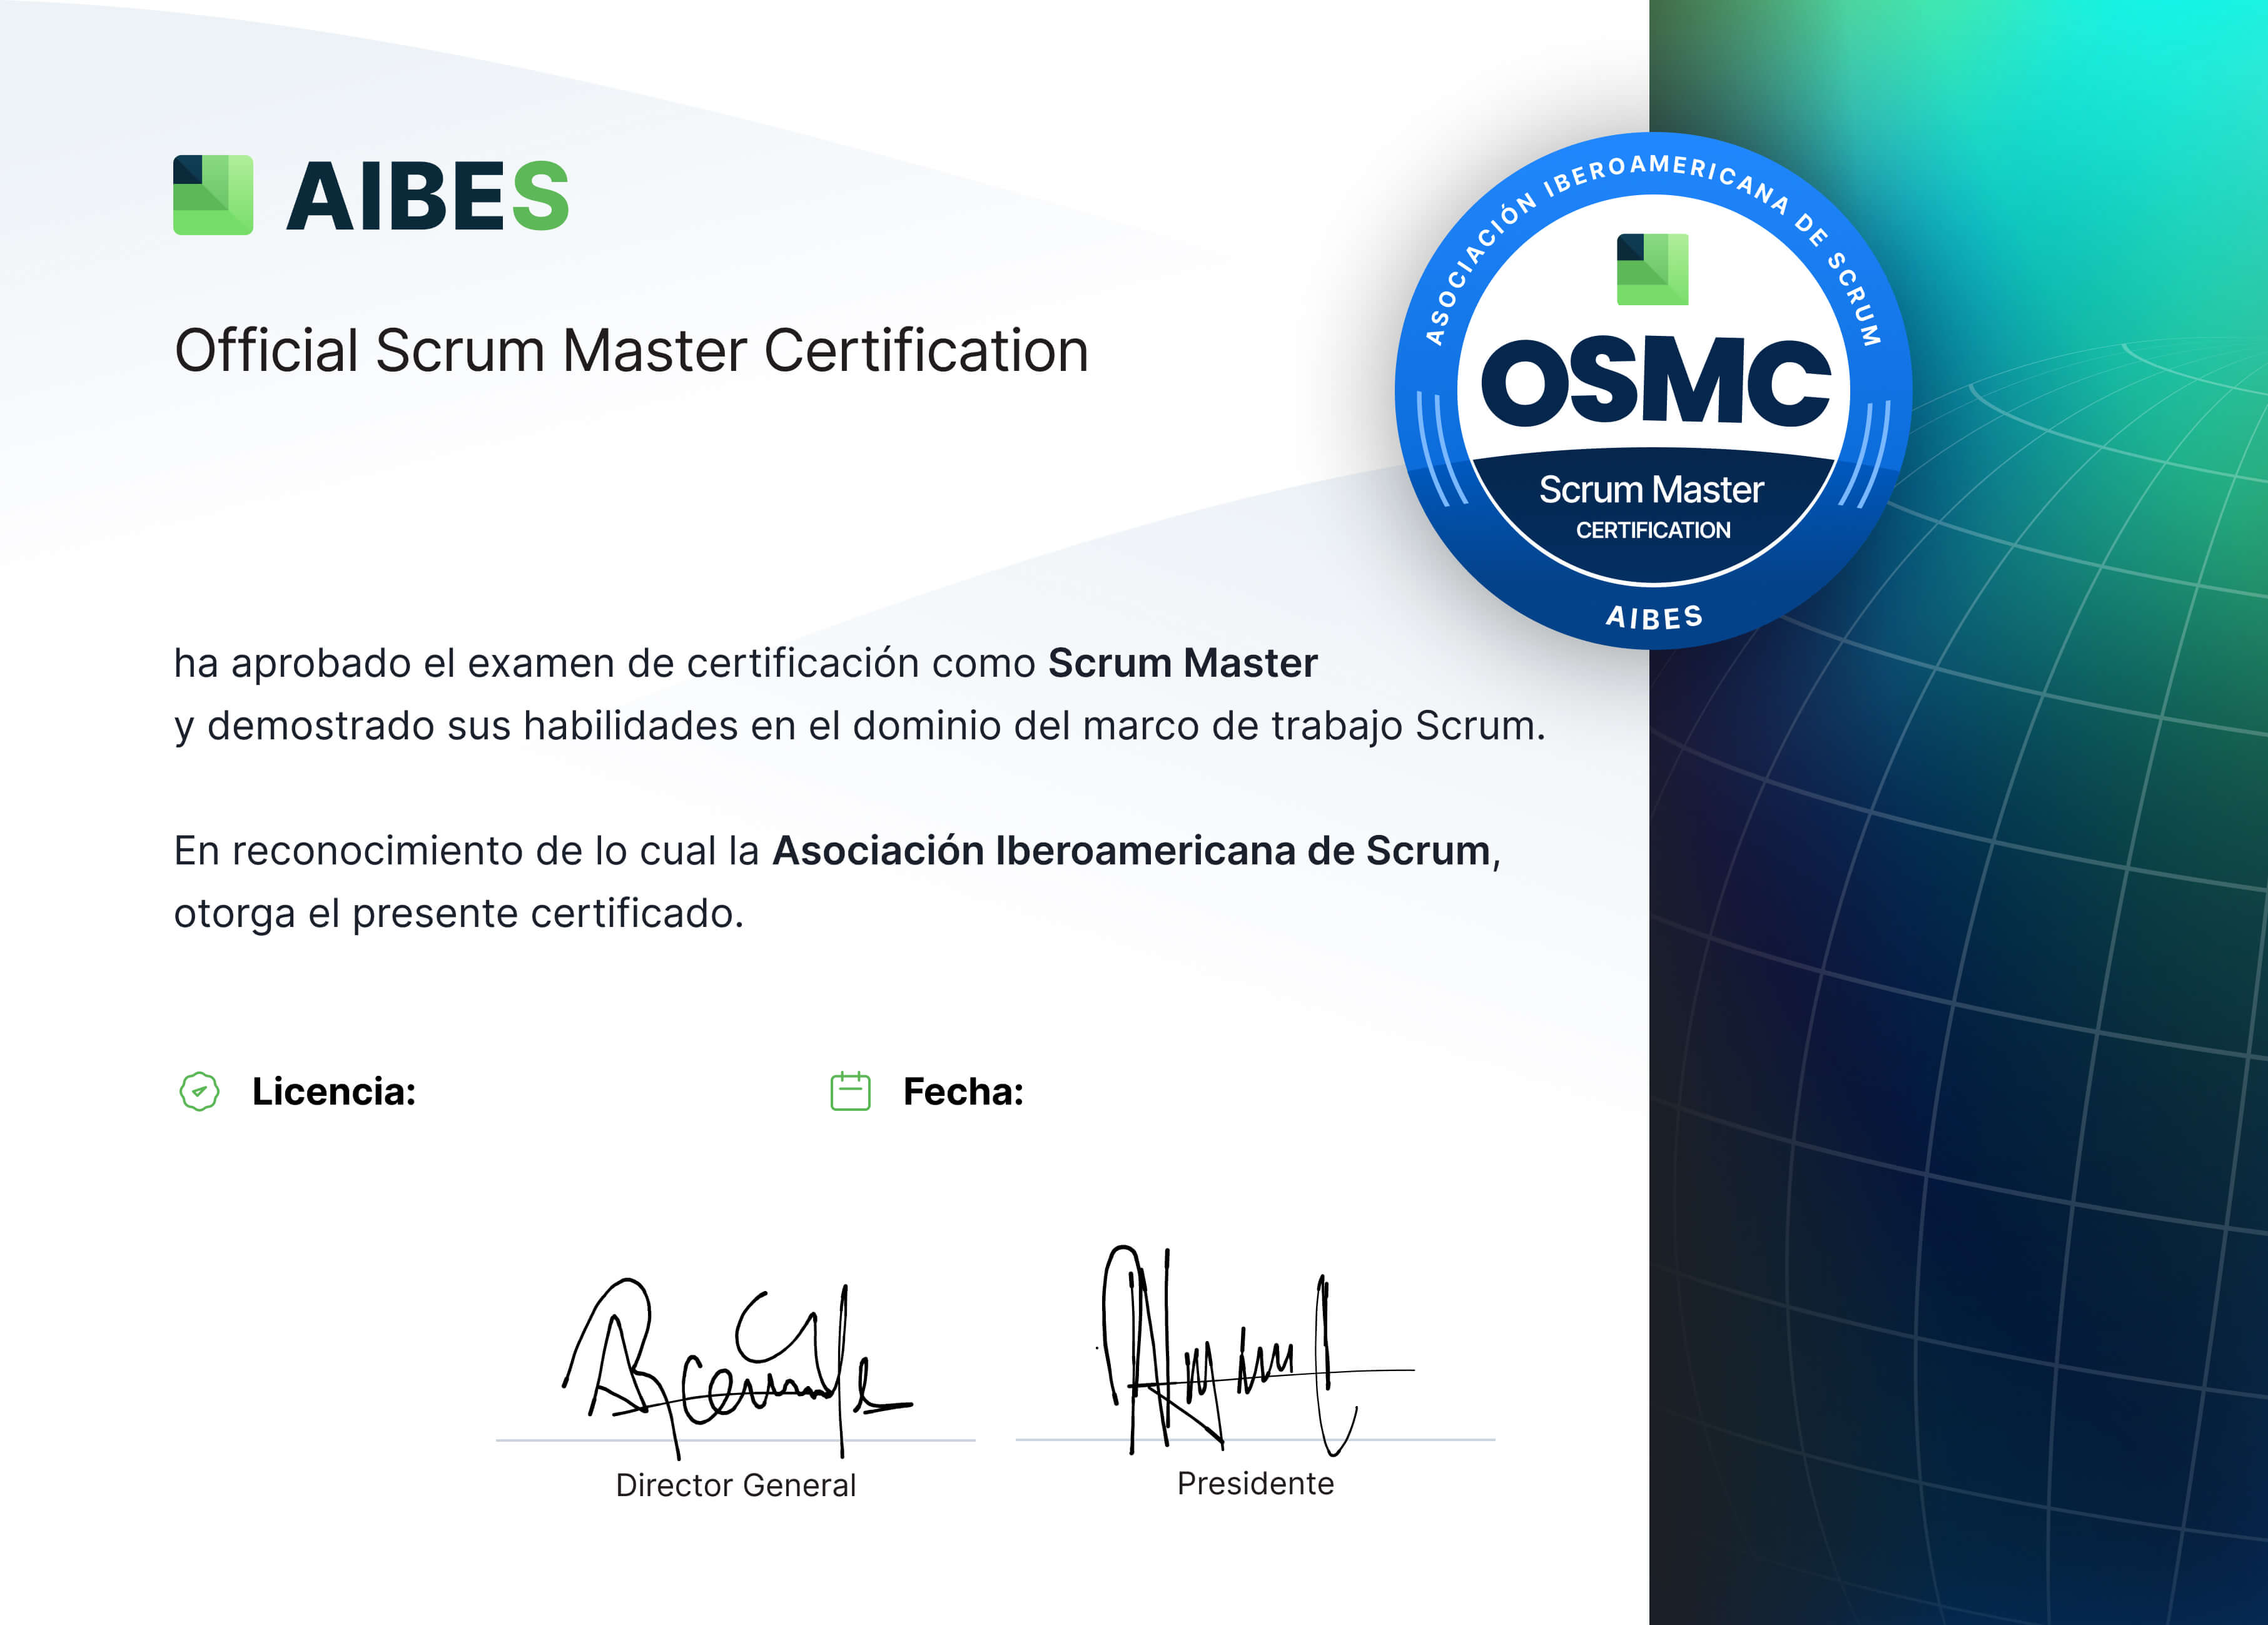 Official Scrum Master Certification